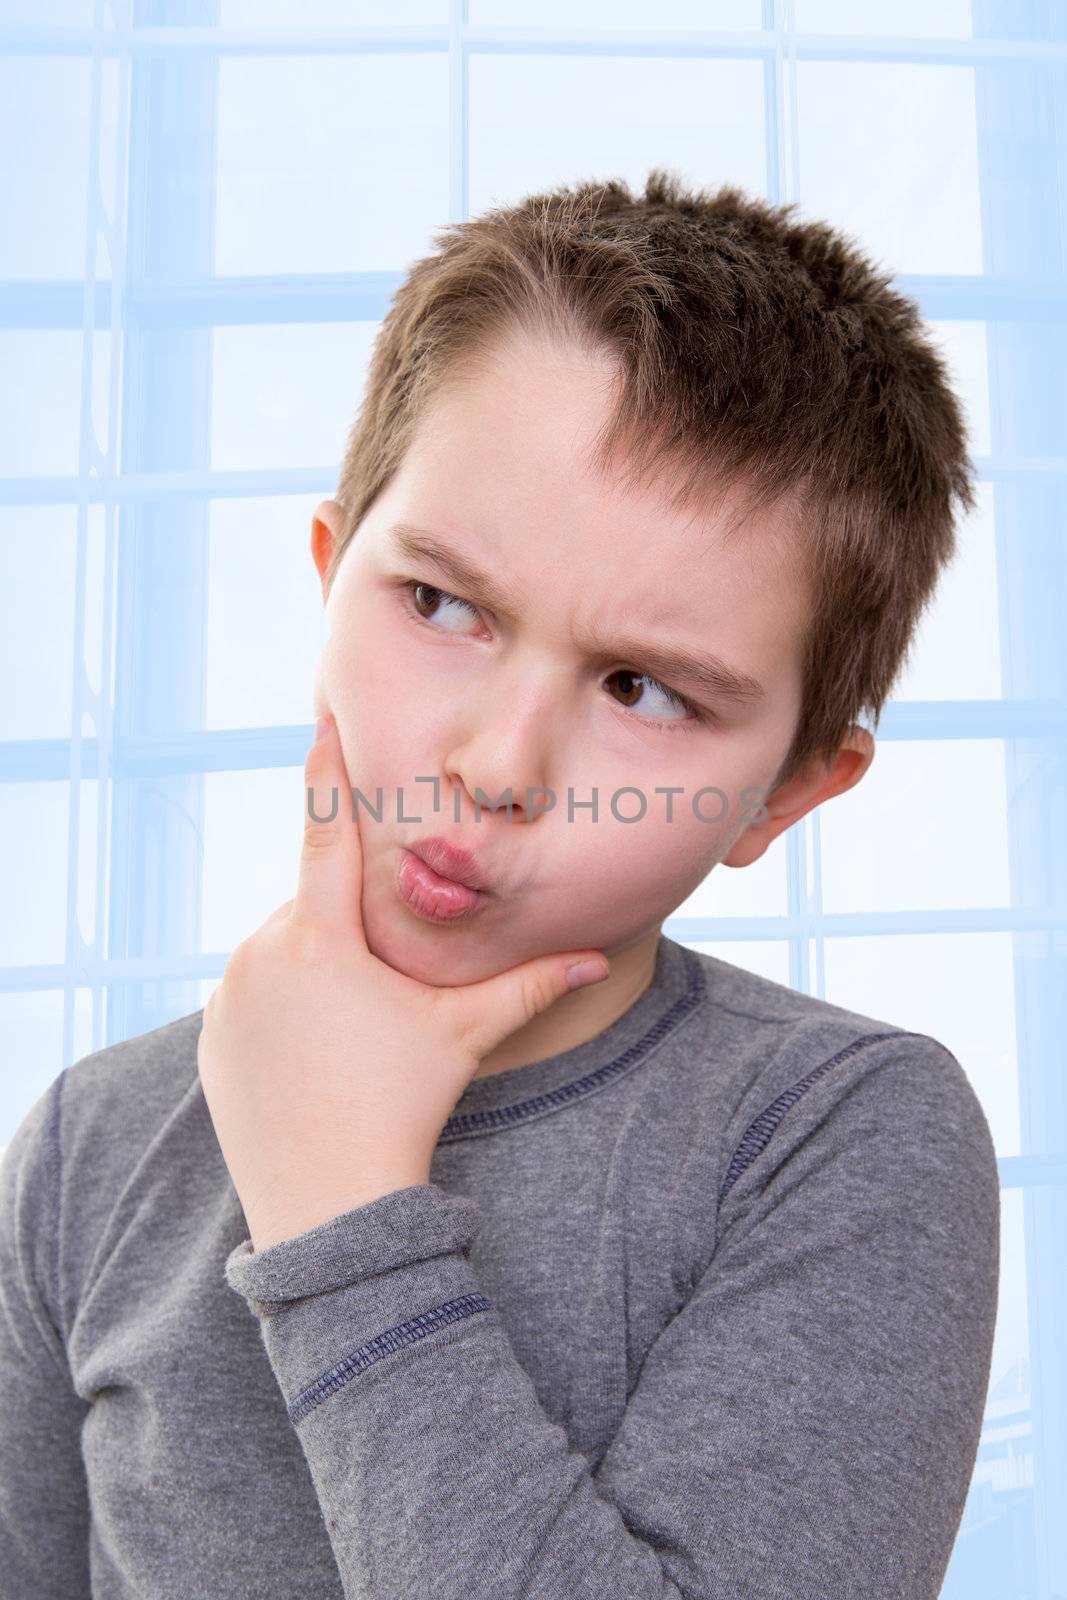 Kid looking away very doubtfully or there might be a math problem he thinks about